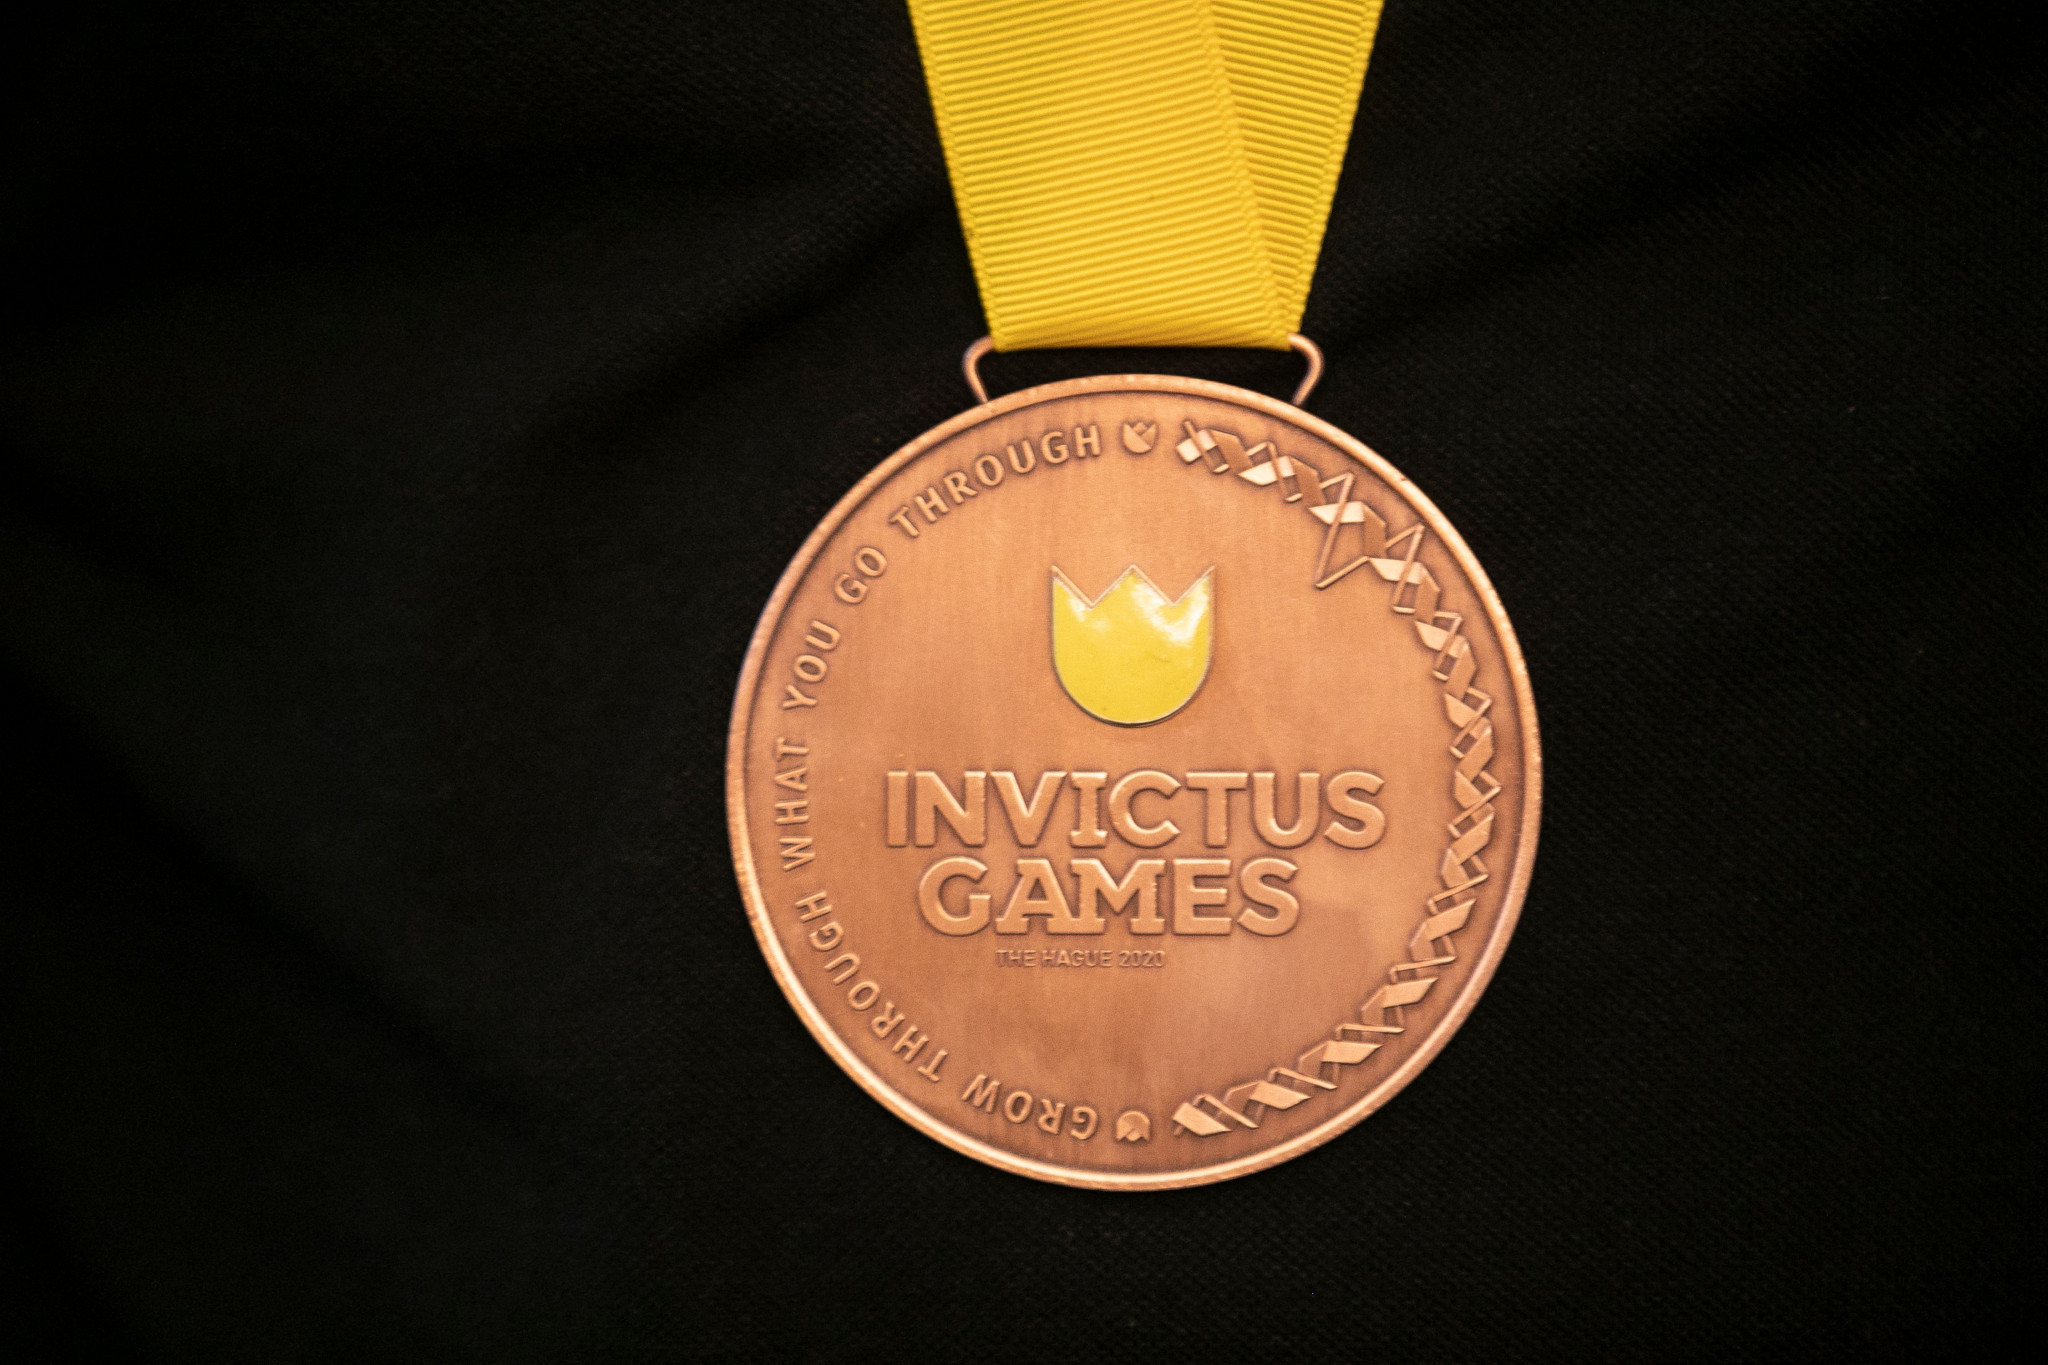 Birmingham is considering a bid for the Invictus Games ©Getty Images